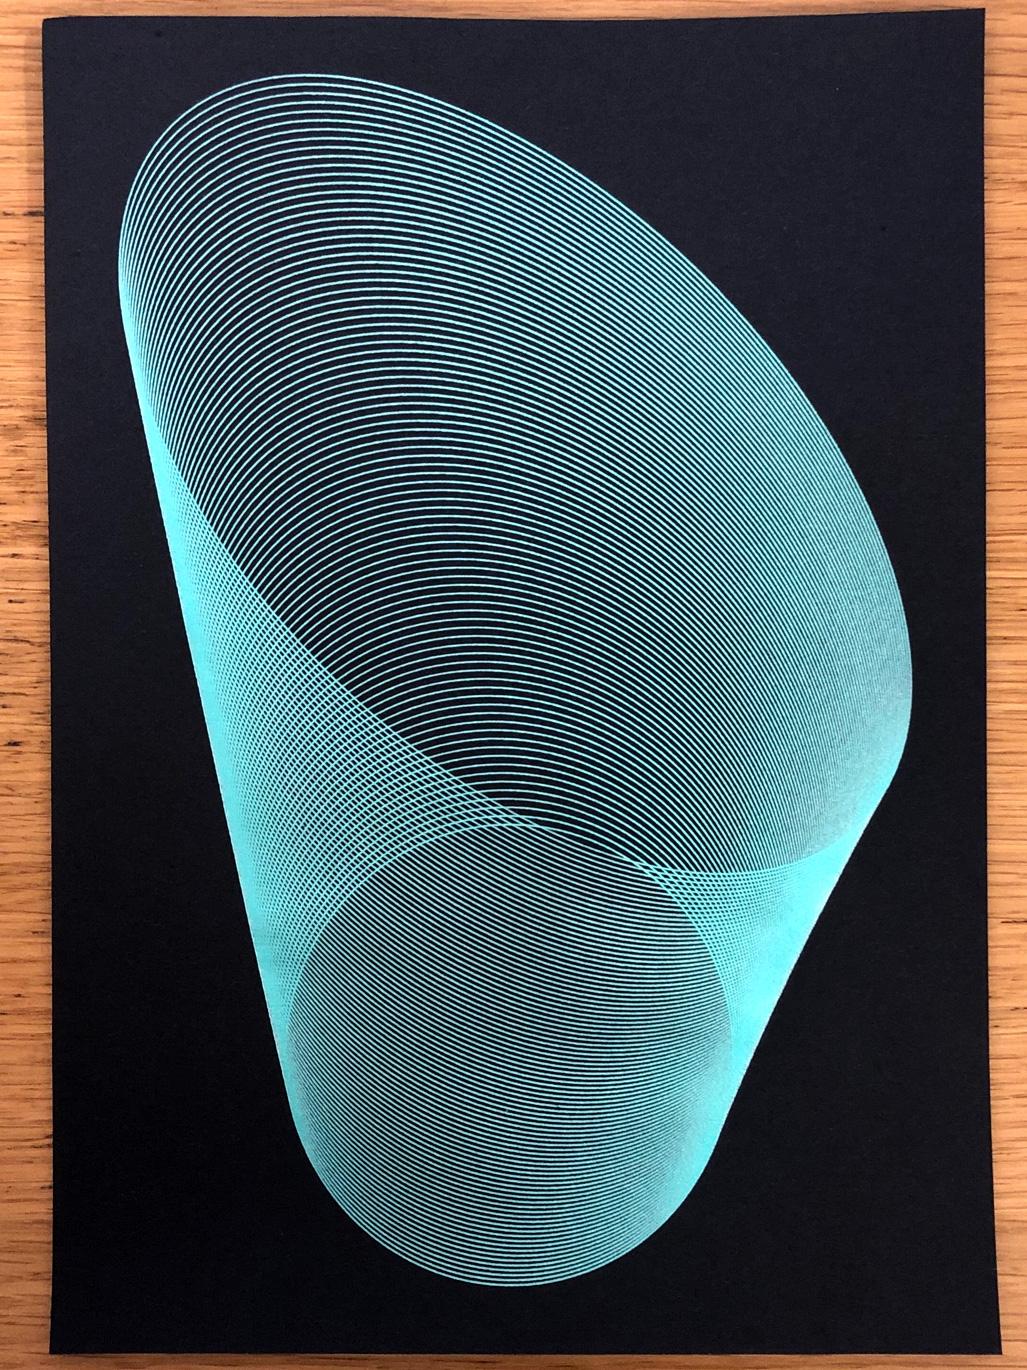 Black paper with metallic light-green ink. A regular circle at the bottom of the page and a skewed, elongated oval at the top of the page are joined by a tightly-packed spiral producing interesting effects as the lines overlap